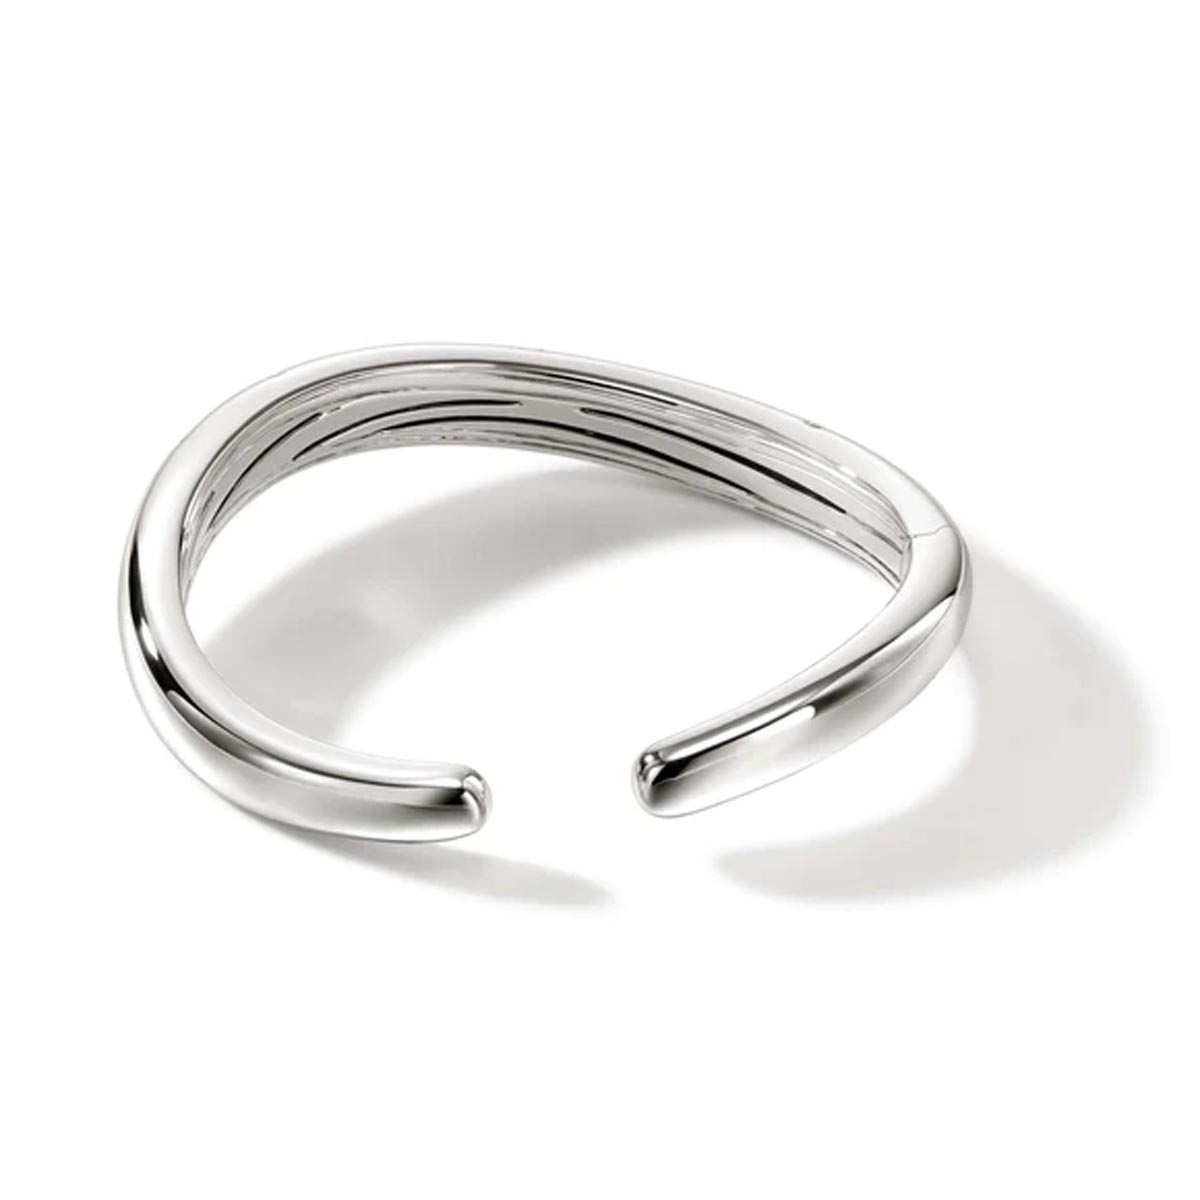 John Hardy Surf Collection Kick Cuff Bracelet in Sterling Silver with Diamonds (3/8ct tw)